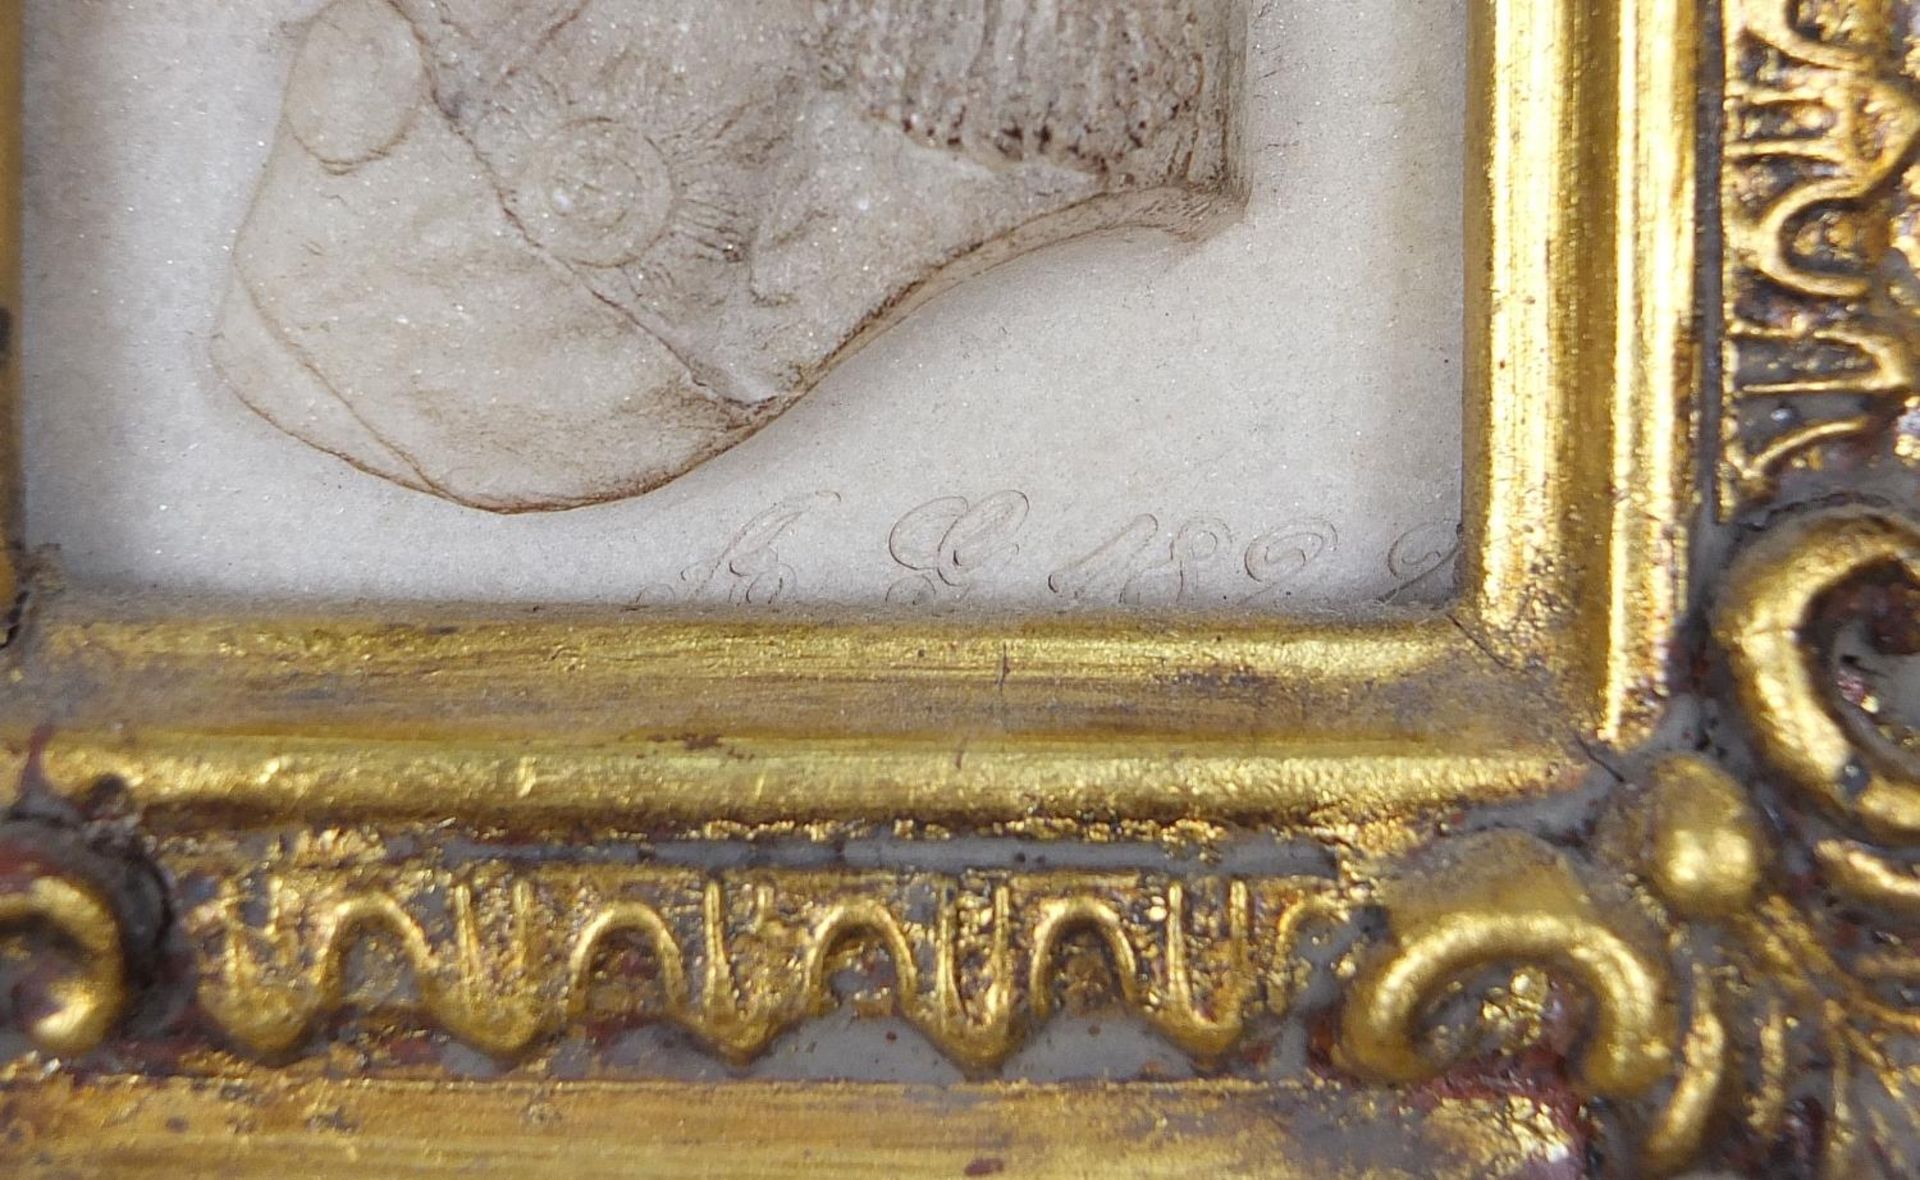 Naval interest marble style plaque of Lord Nelson housed in an ornate gilt frame, 20cm x 18cm - Image 6 of 8